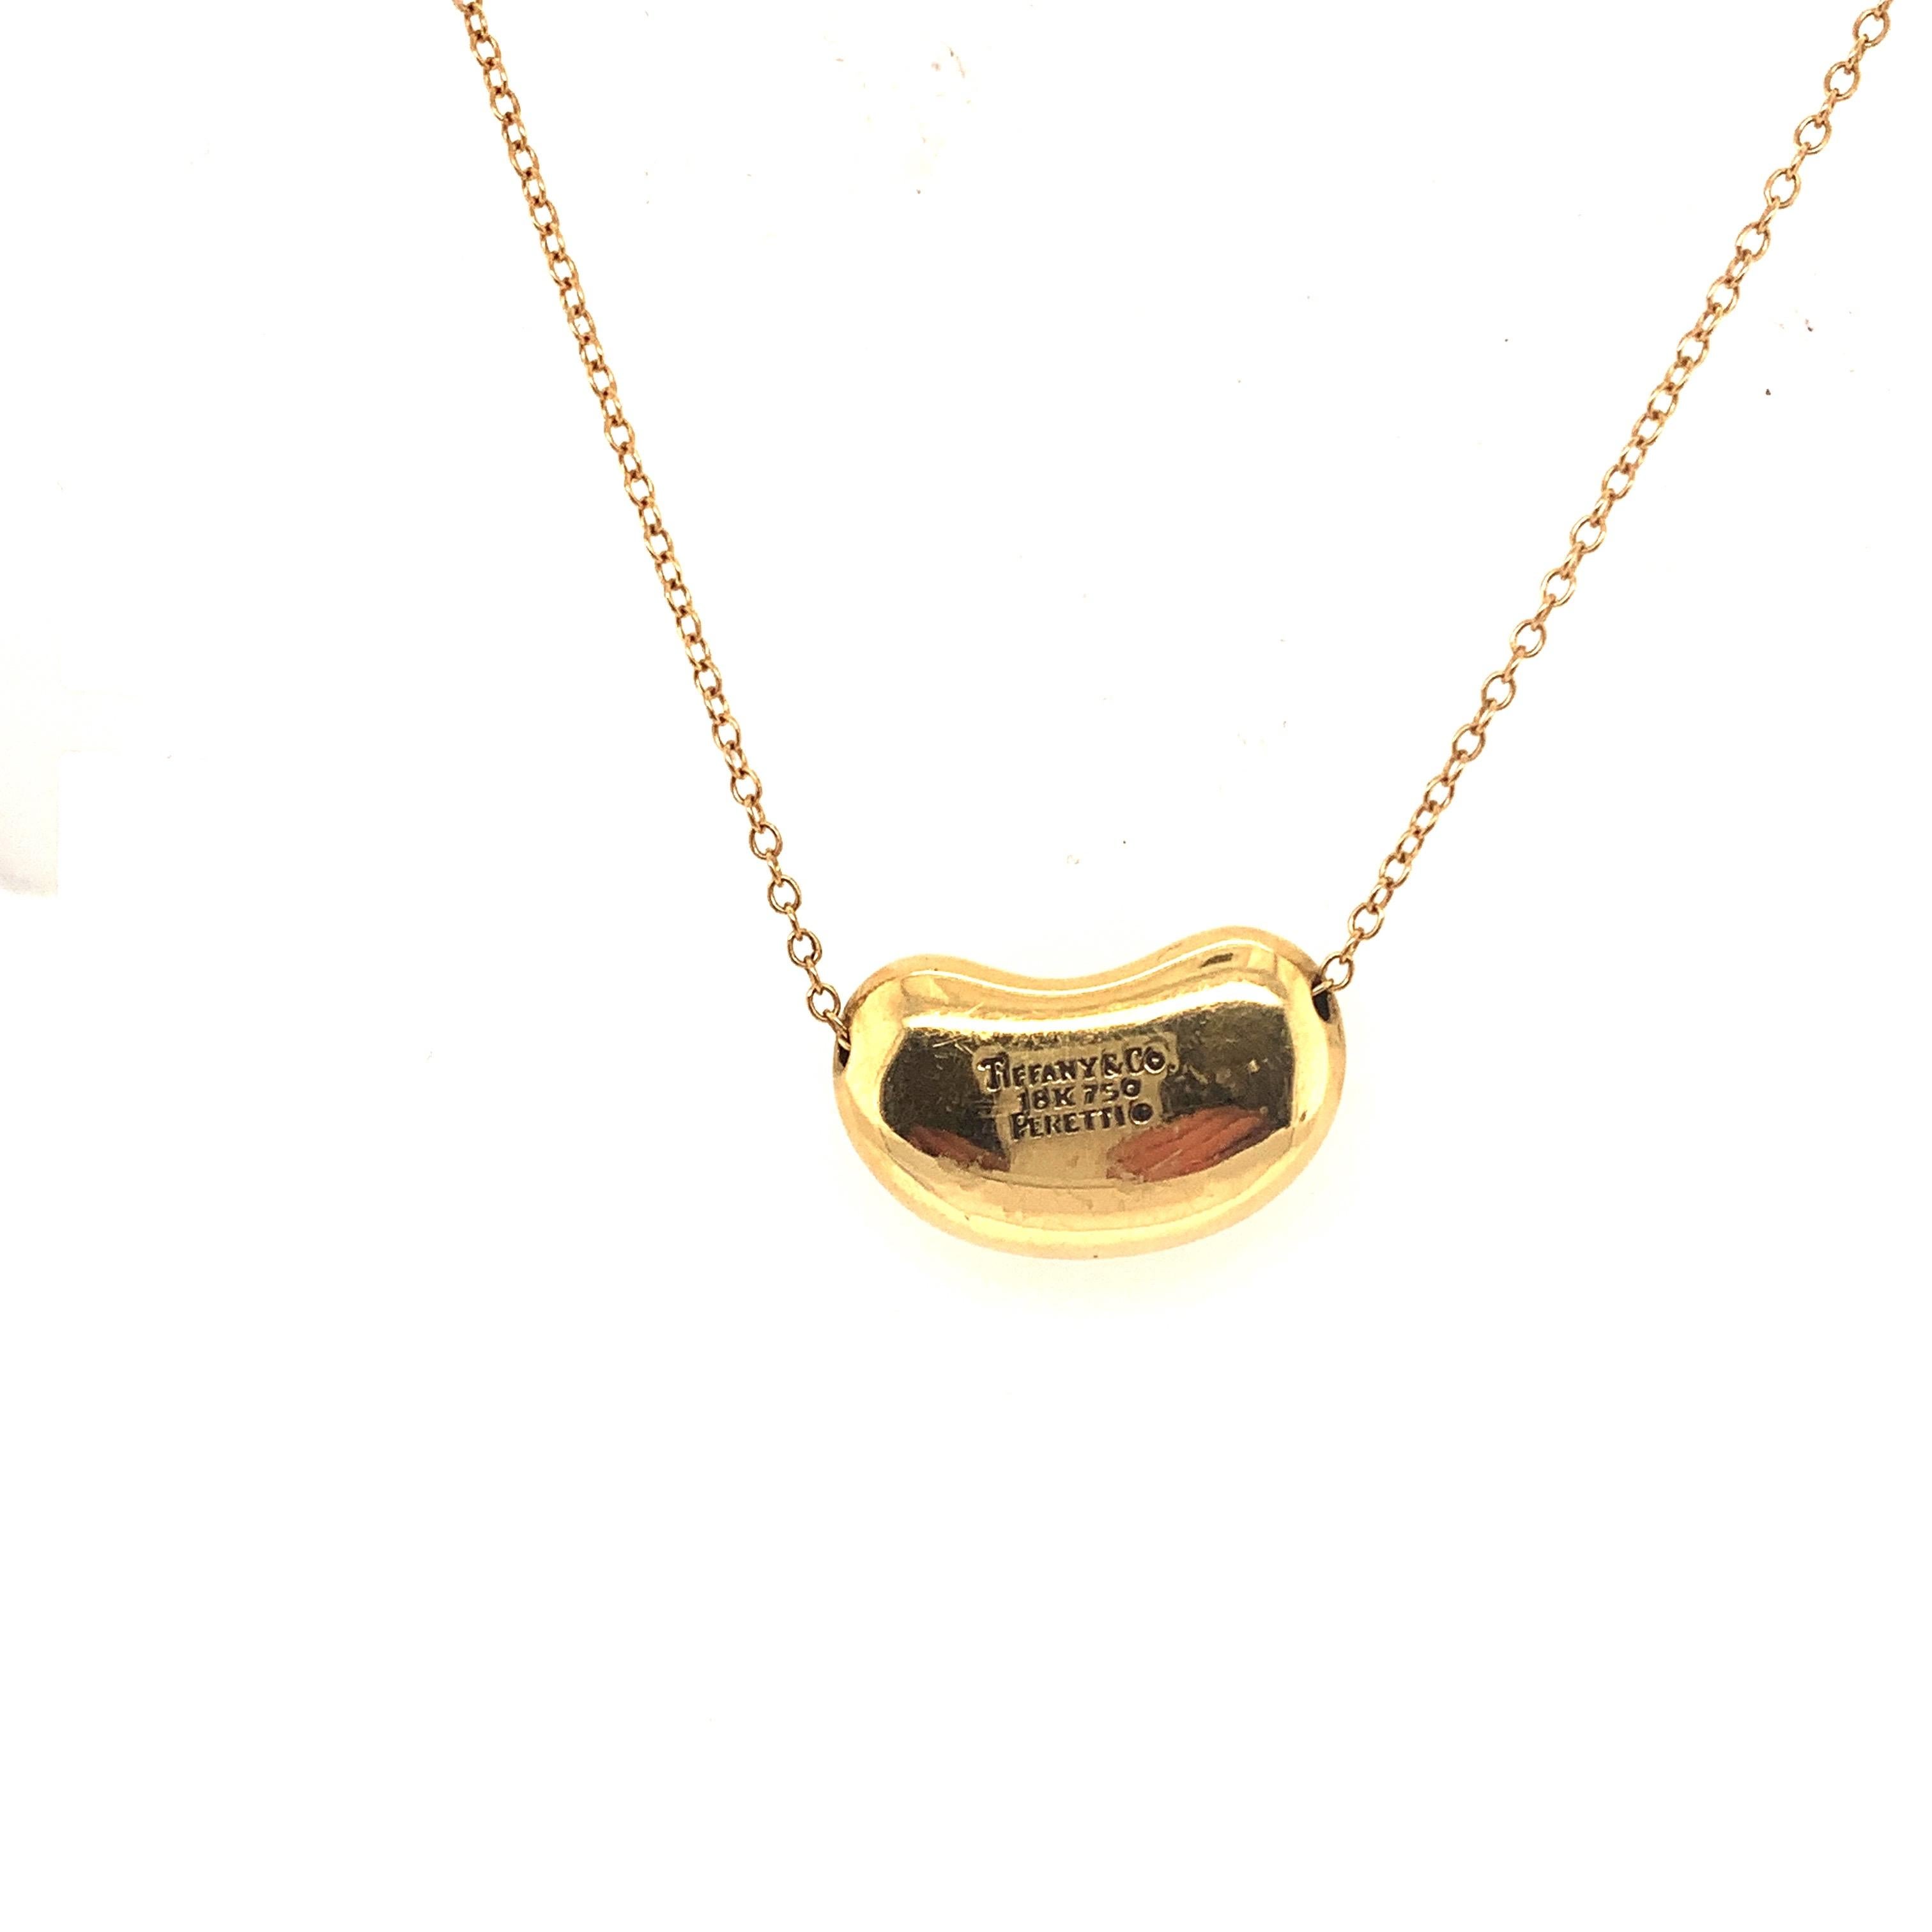 Super large Bean. From the famous Tiffany and Co. designer Elsa Peretti  Bean. This iconic Bean represents all things Tiffany.
Weighing over 18 grams of solid 18k Gold, this ones a showstopper.
Chain and bean stamped Peretti Tiffany.

All items sold